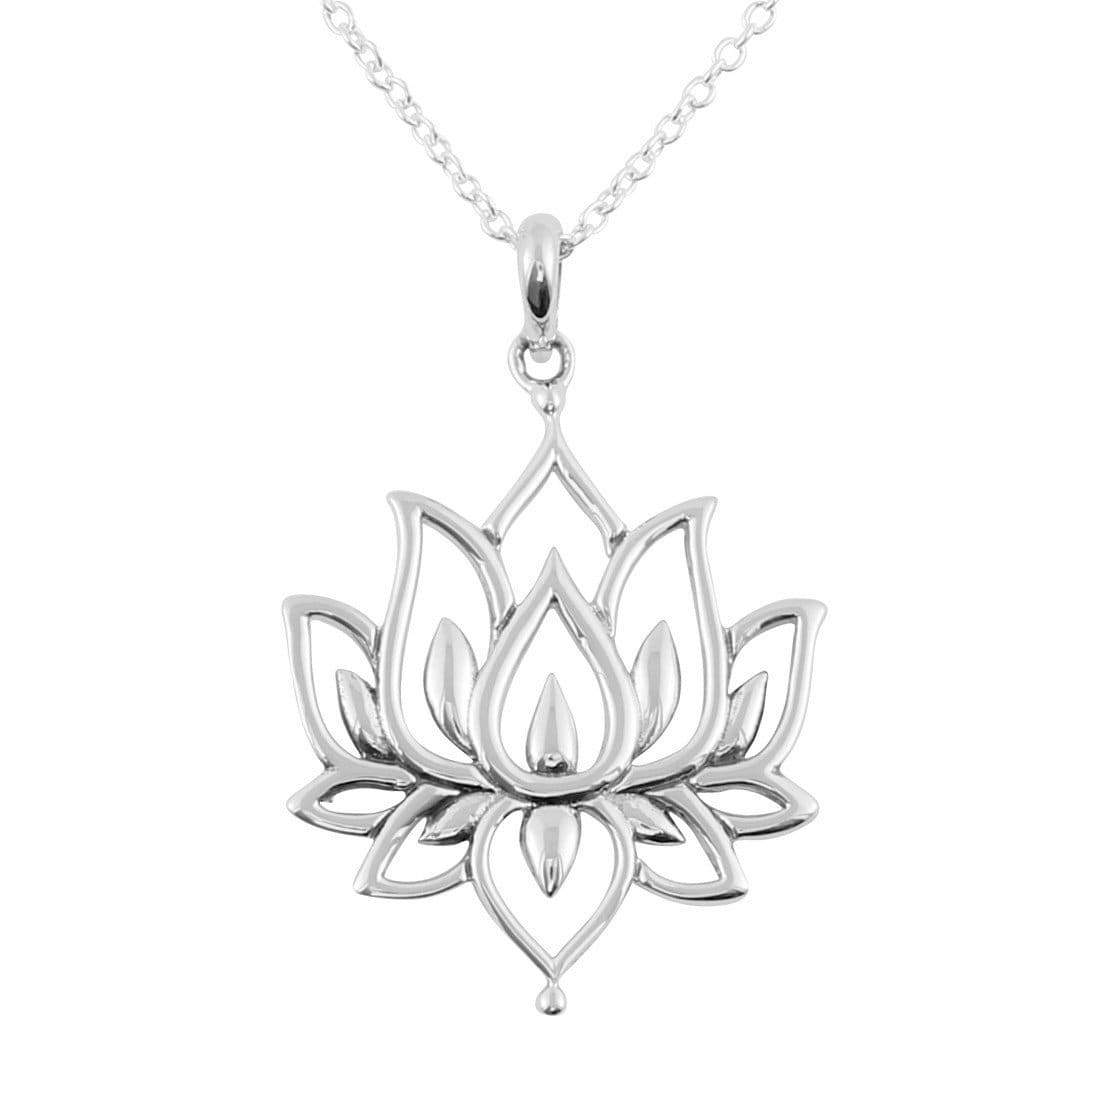 Midsummer Star Necklaces Blossoming Lotus Necklace